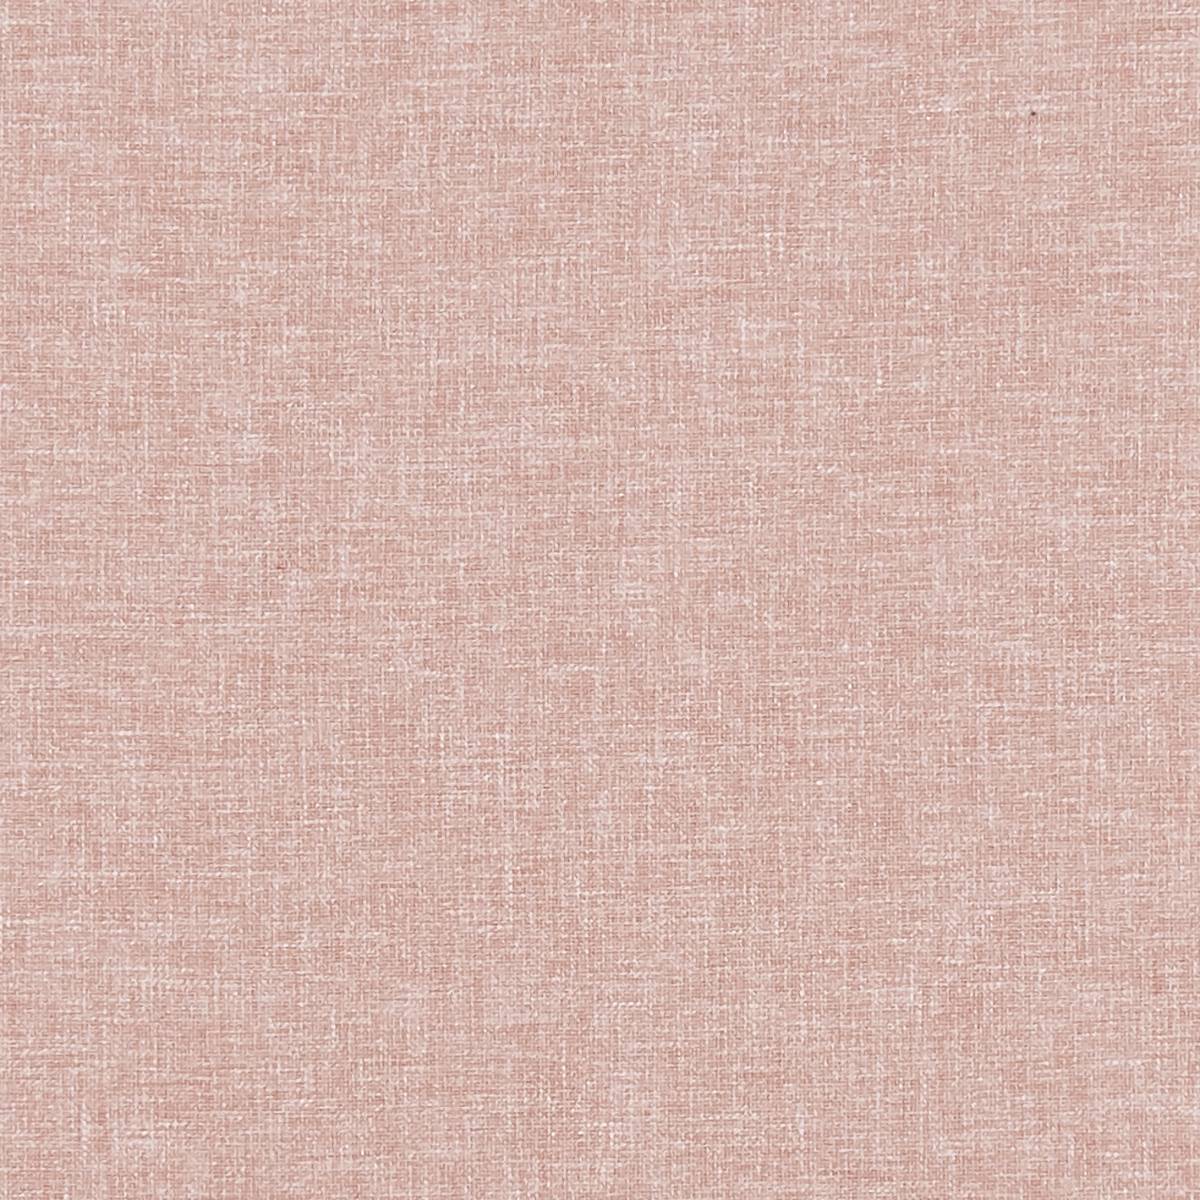 Kelso Blush Fabric by Studio G